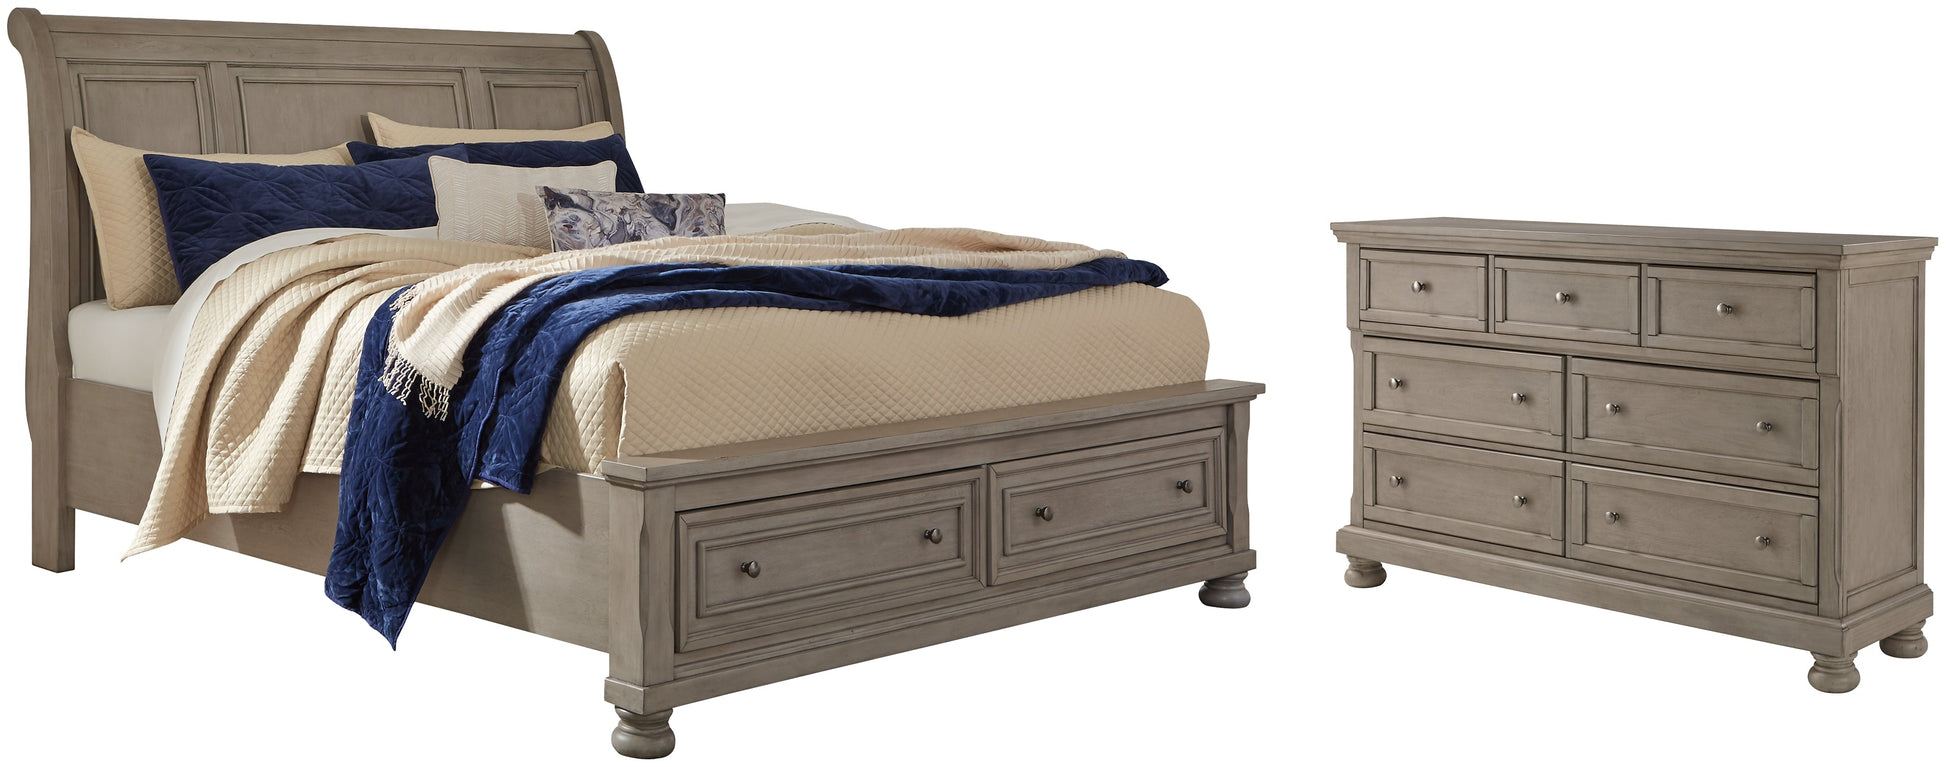 Lettner California King Sleigh Bed with Dresser at Walker Mattress and Furniture Locations in Cedar Park and Belton TX.